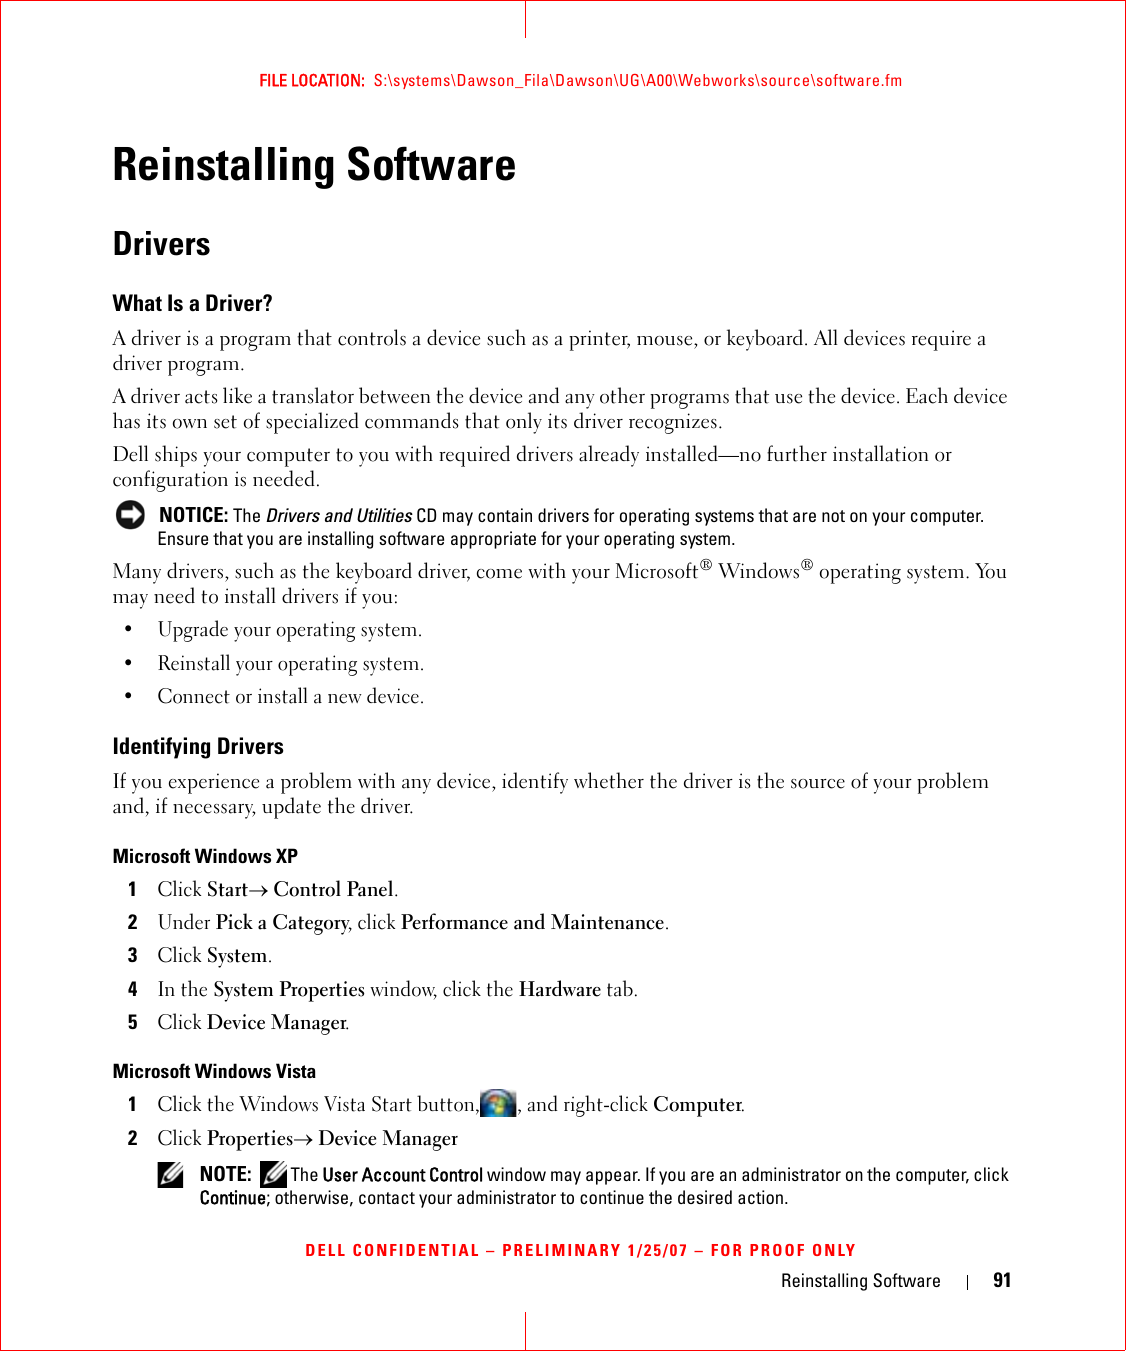 Reinstalling Software 91FILE LOCATION:  S:\systems\Dawson_Fila\Dawson\UG\A00\Webworks\source\software.fmDELL CONFIDENTIAL – PRELIMINARY 1/25/07 – FOR PROOF ONLYReinstalling SoftwareDriversWhat Is a Driver?A driver is a program that controls a device such as a printer, mouse, or keyboard. All devices require a driver program.A driver acts like a translator between the device and any other programs that use the device. Each device has its own set of specialized commands that only its driver recognizes.Dell ships your computer to you with required drivers already installed—no further installation or configuration is needed. NOTICE: The Drivers and Utilities CD may contain drivers for operating systems that are not on your computer. Ensure that you are installing software appropriate for your operating system.Many drivers, such as the keyboard driver, come with your Microsoft® Windows® operating system. You may need to install drivers if you:• Upgrade your operating system.• Reinstall your operating system.• Connect or install a new device.Identifying DriversIf you experience a problem with any device, identify whether the driver is the source of your problem and, if necessary, update the driver.Microsoft Windows XP1Click Start→ Control Panel.2Under Pick a Category, click Performance and Maintenance.3Click System.4In the System Properties window, click the Hardware tab.5Click Device Manager.Microsoft Windows Vista1Click the Windows Vista Start button, , and right-click Computer.2Click Properties→ Device Manager NOTE:  The User Account Control window may appear. If you are an administrator on the computer, click Continue; otherwise, contact your administrator to continue the desired action.